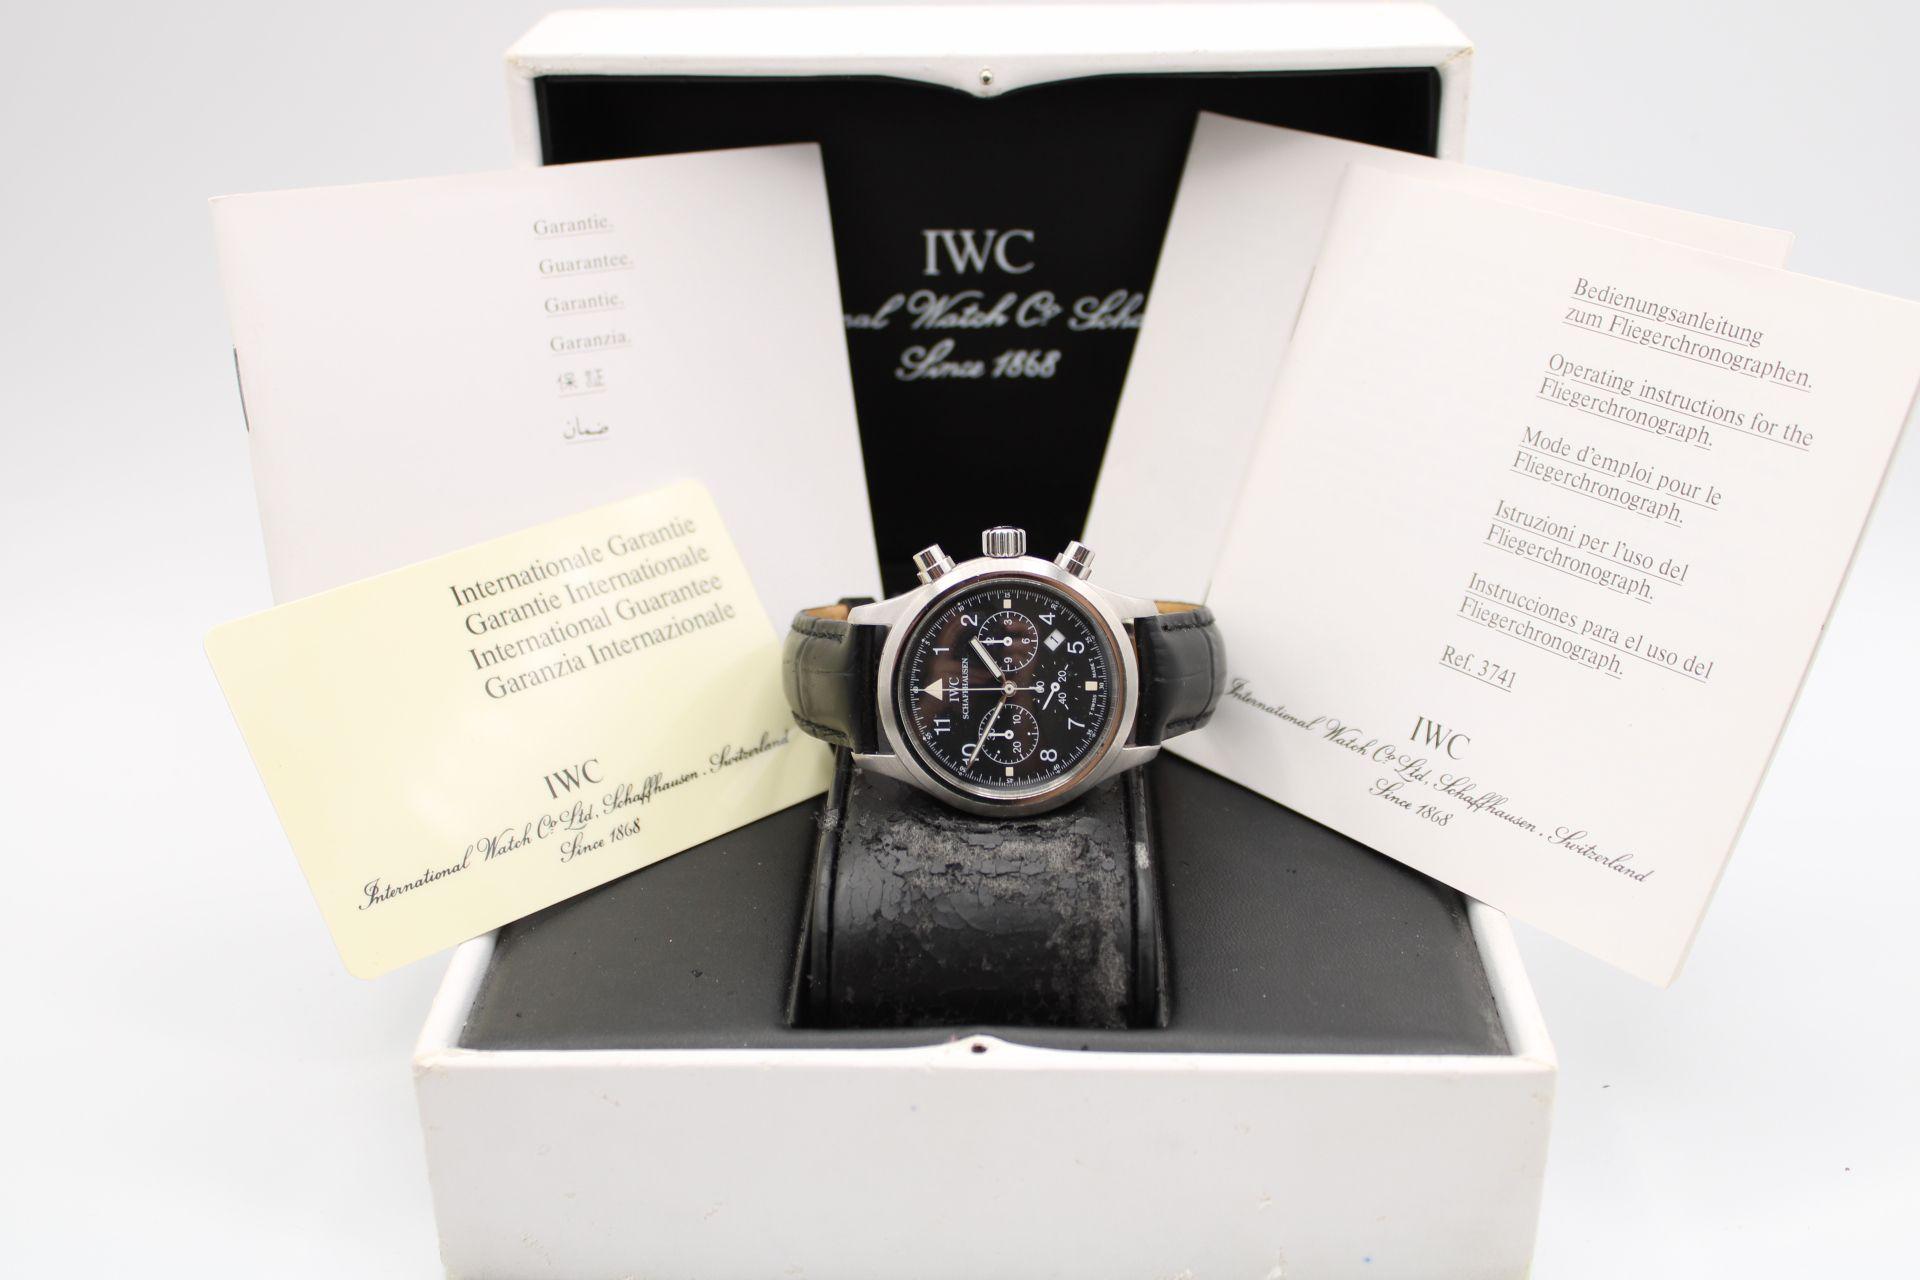 This IWC Pilot is accompanied by its inner box, manuals and warranty card dated 1997. 

The IWC Pilot Chronograph, model IW3741, features a 36mm stainless steel case, black dial with Arabic numerals, three sub-dials positioned at 3, 6 and 9 o'clock,